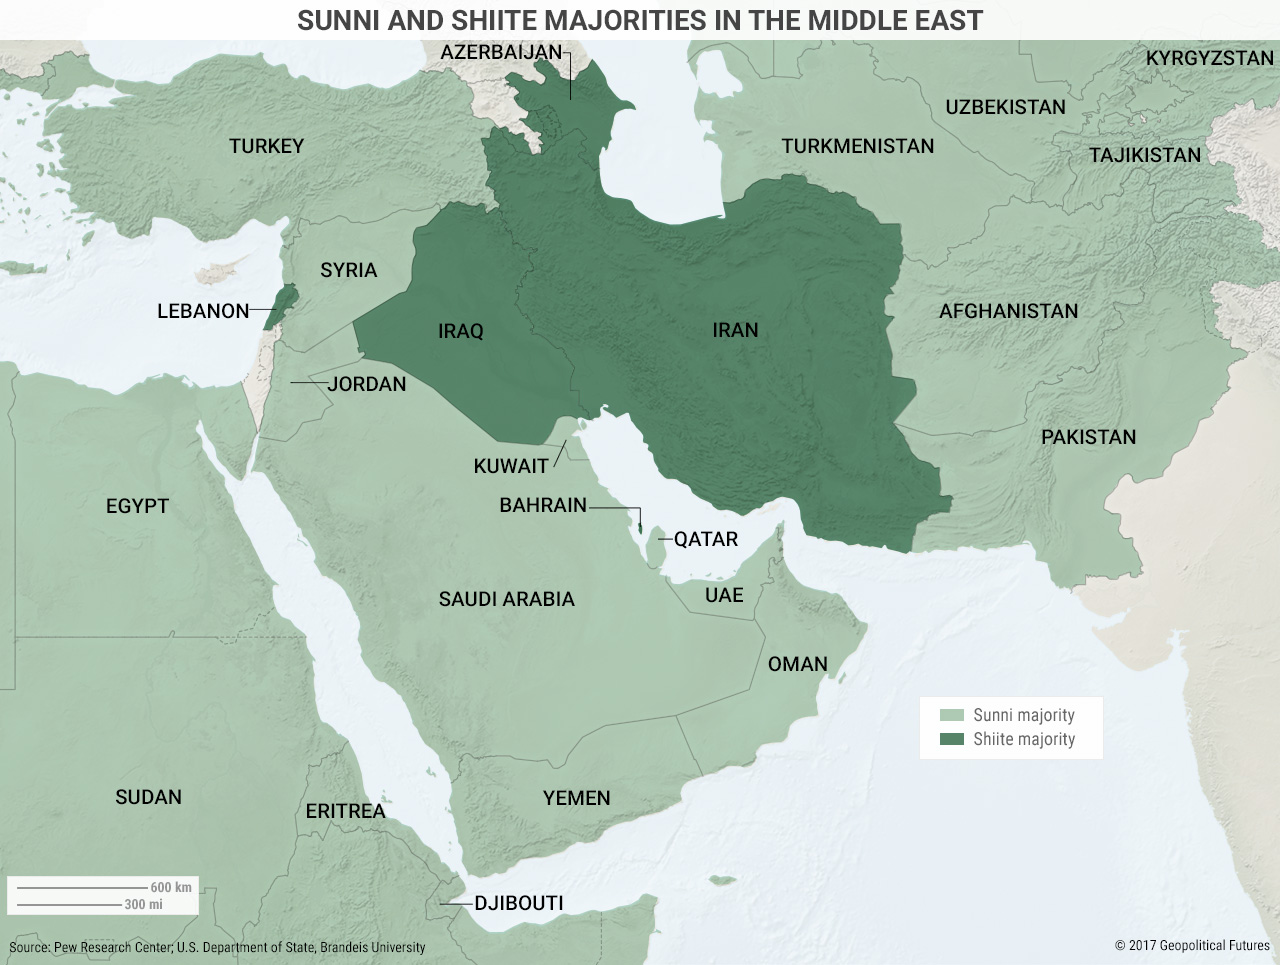 Middle Eastern countries with a sunni or a shiit majority